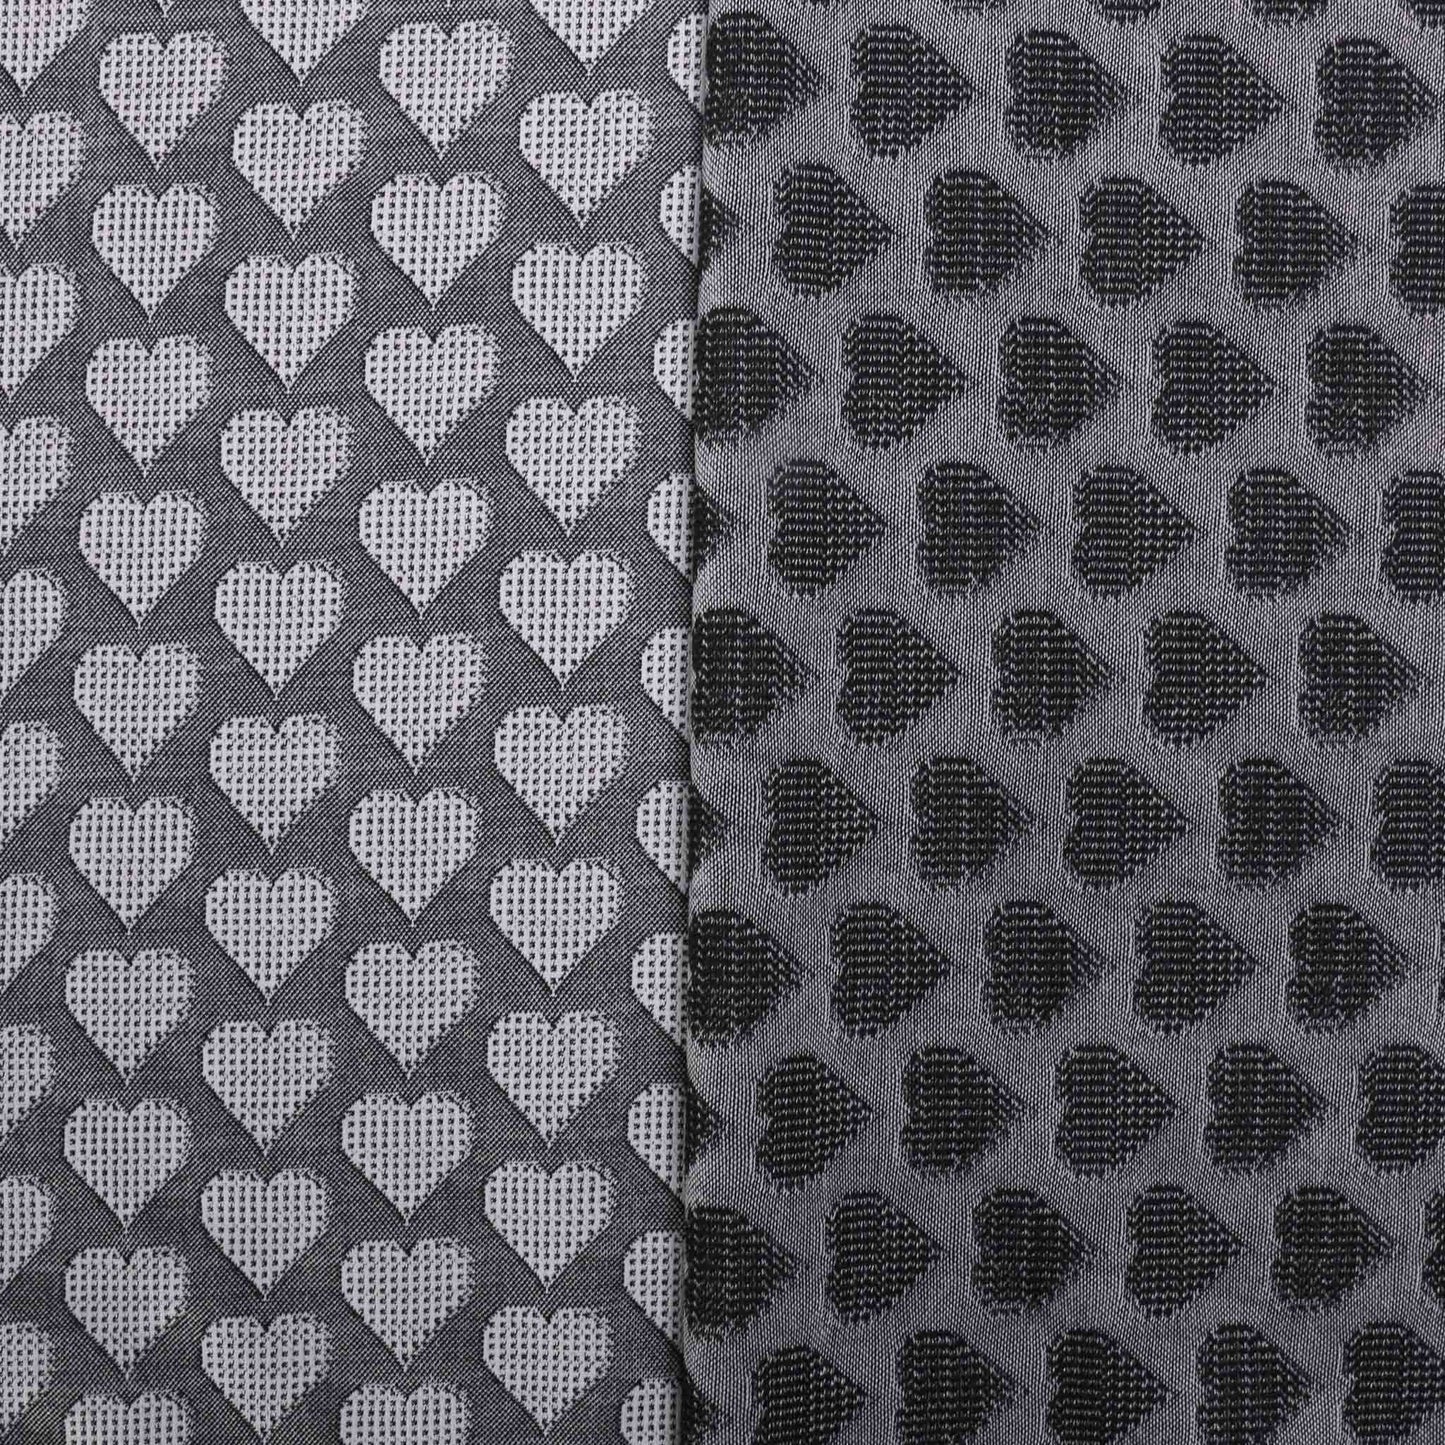 black and white love heart printed jersey dress fabric